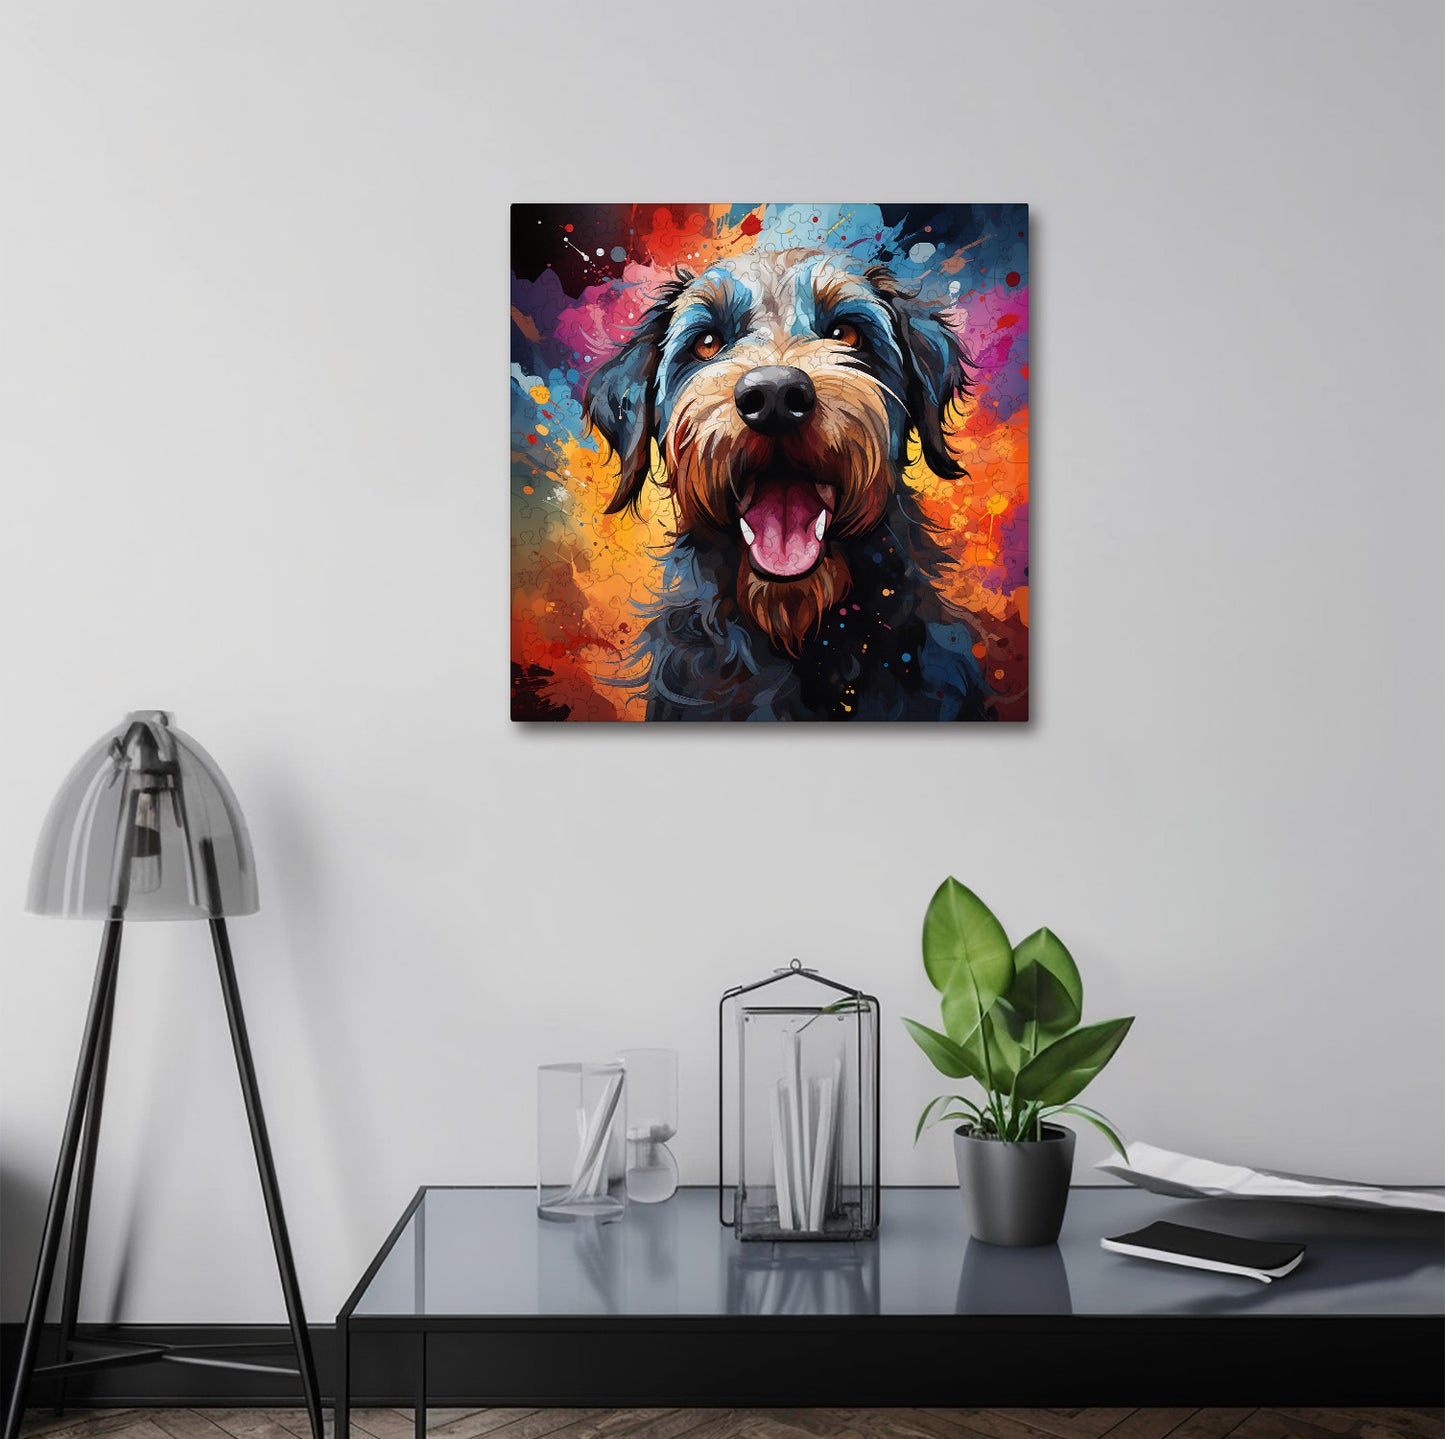 Puzzle cu Animale - Caini - Soft Coated Wheaten Terrier 3 - 200 piese - 30 x 30 cm